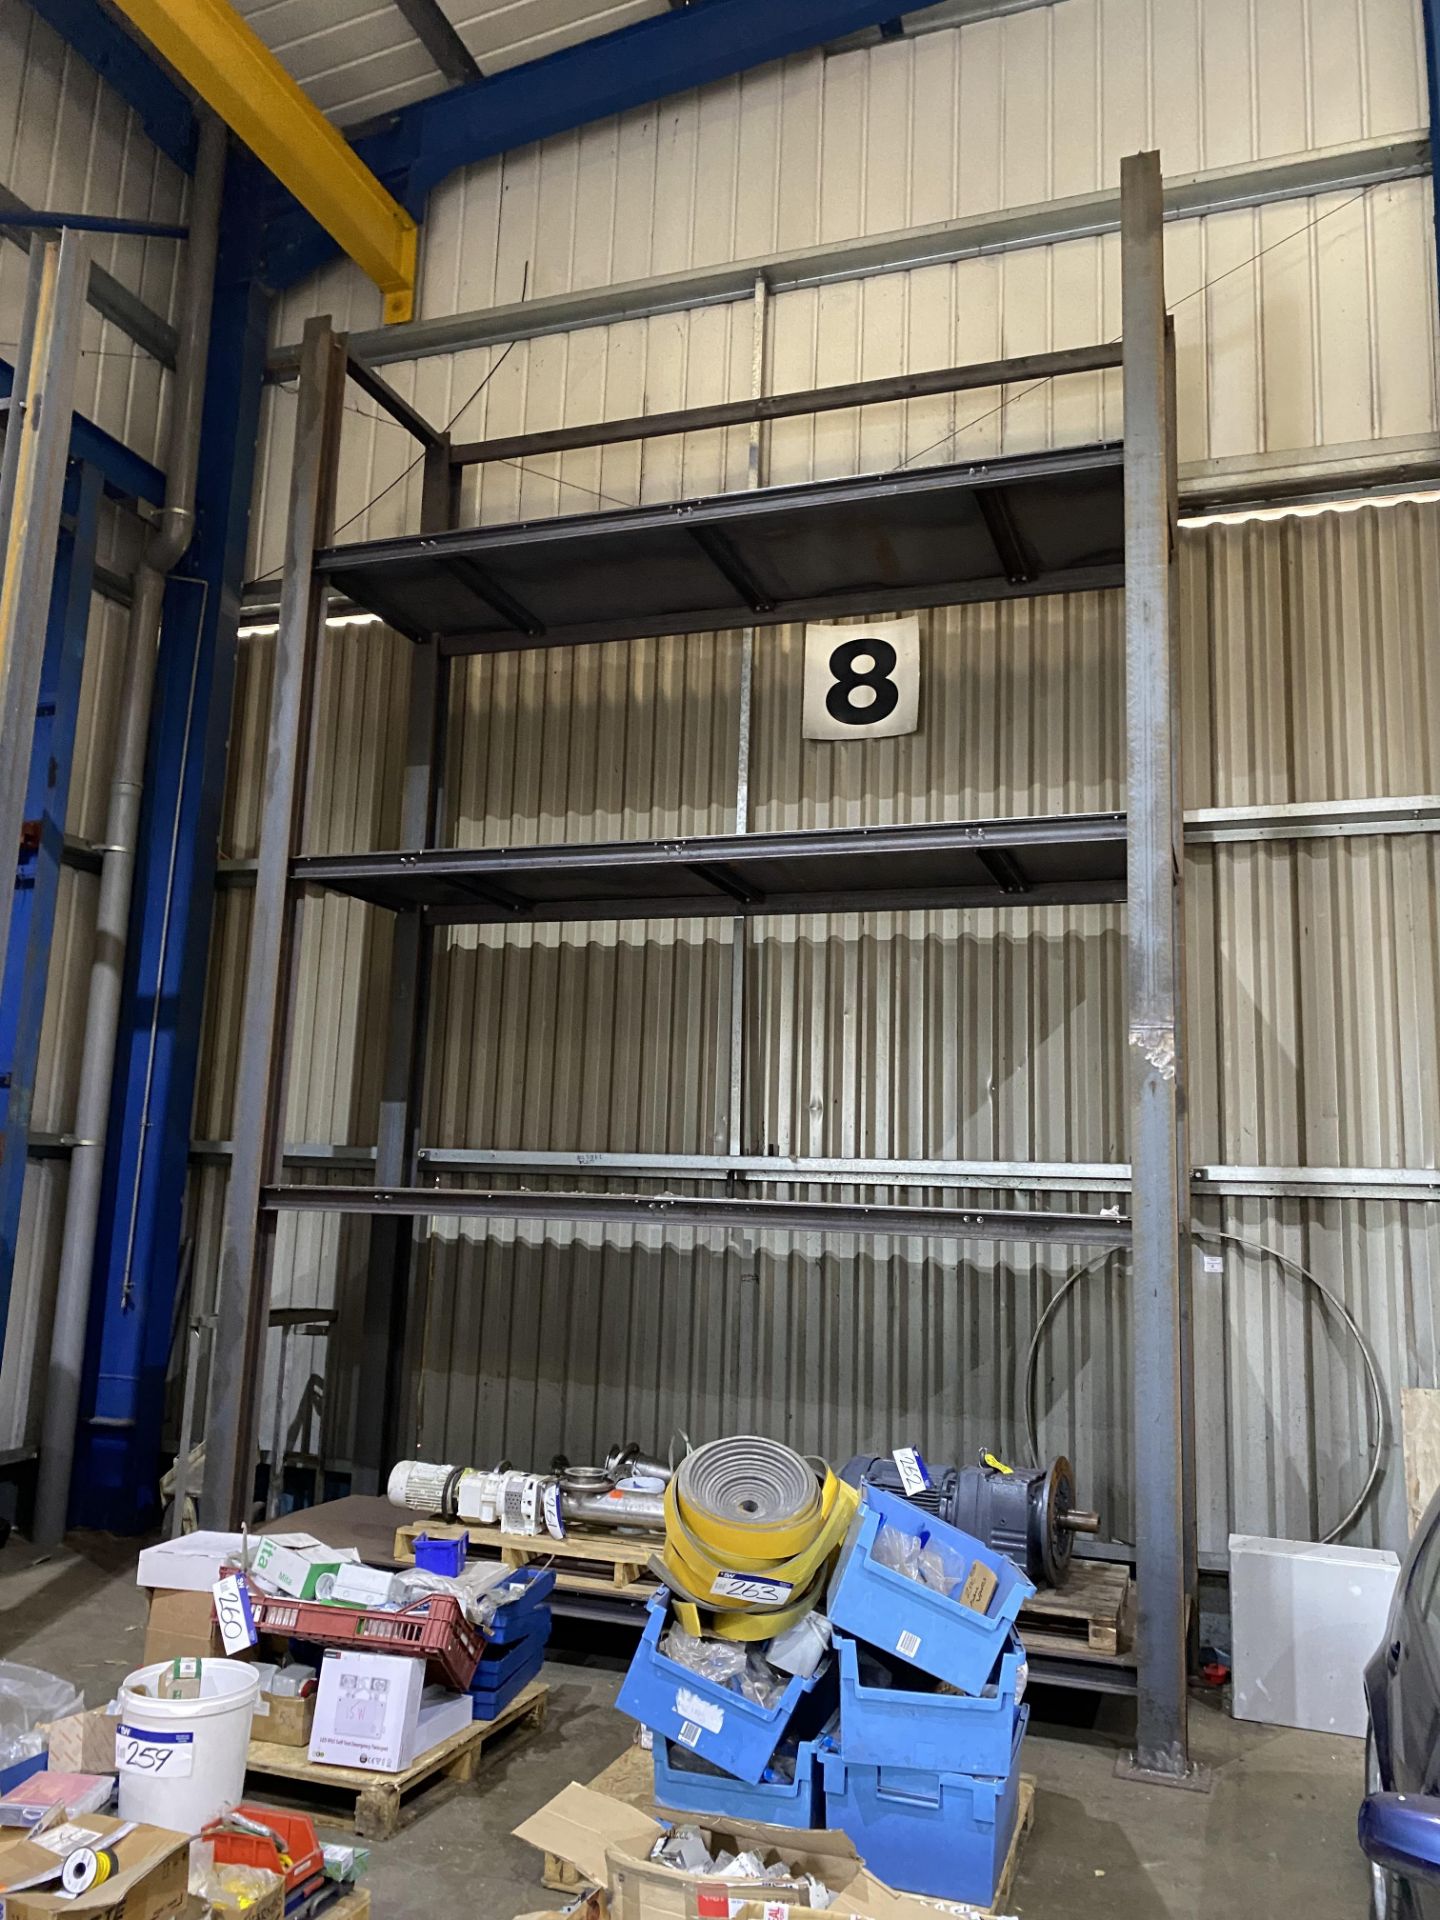 ONE TWO BAY & ONE SINGLE BAY BOLTED STEEL HEAVY DUTY RACKS, two bay rack approx. 7.9m x 1.3m x 5. - Image 3 of 3